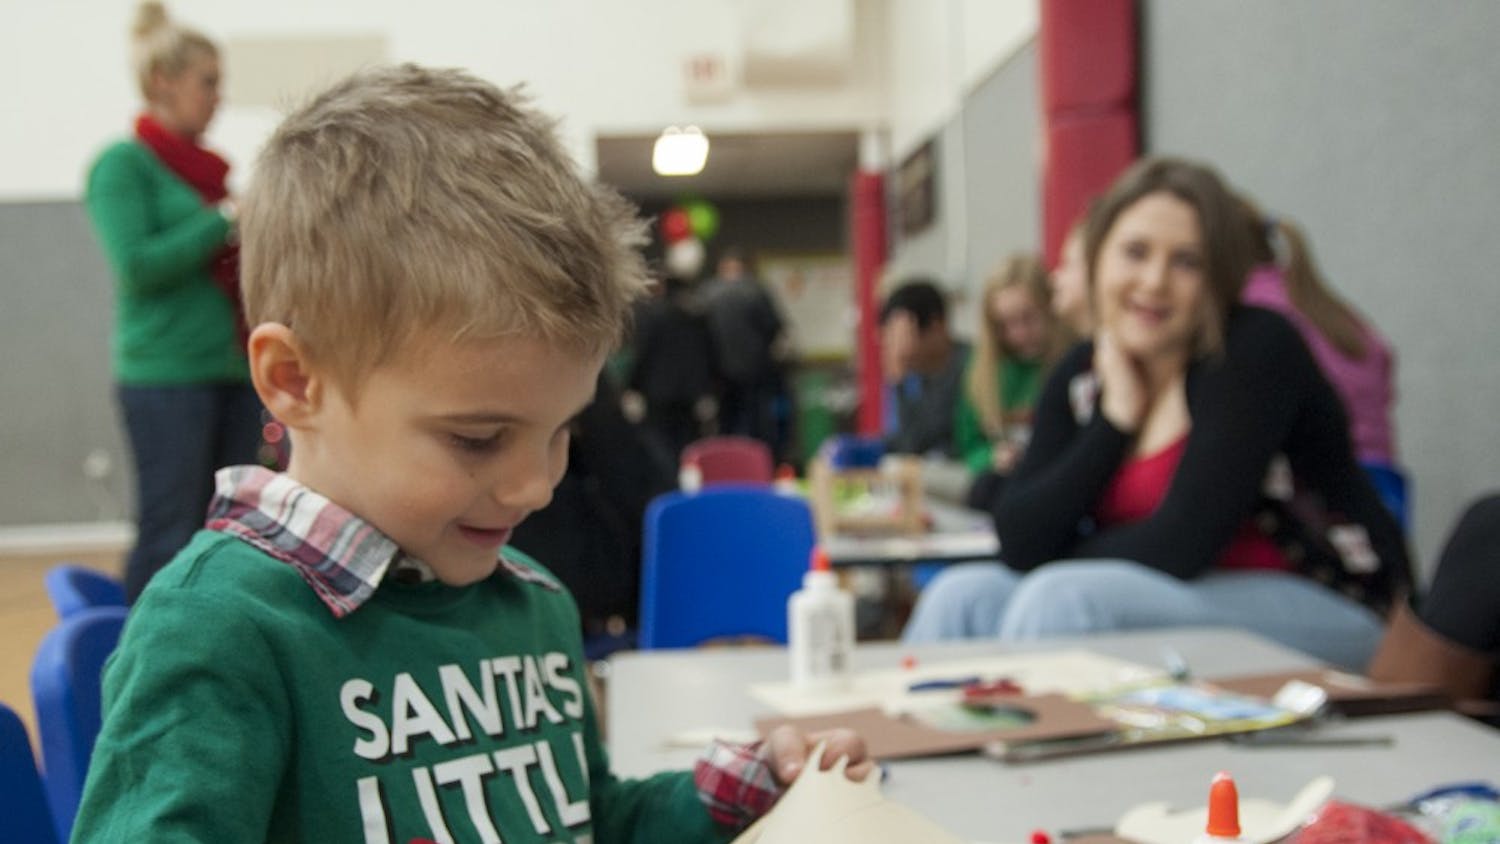 Four-year-old Parker Foust cuts paper to make a reindeer craft during Breakfast with Santa in 2013 at the YMCA. The YMCA had to shut down their childcare program because they could no longer afford the financial subsidies required to remain a licensed child care center.